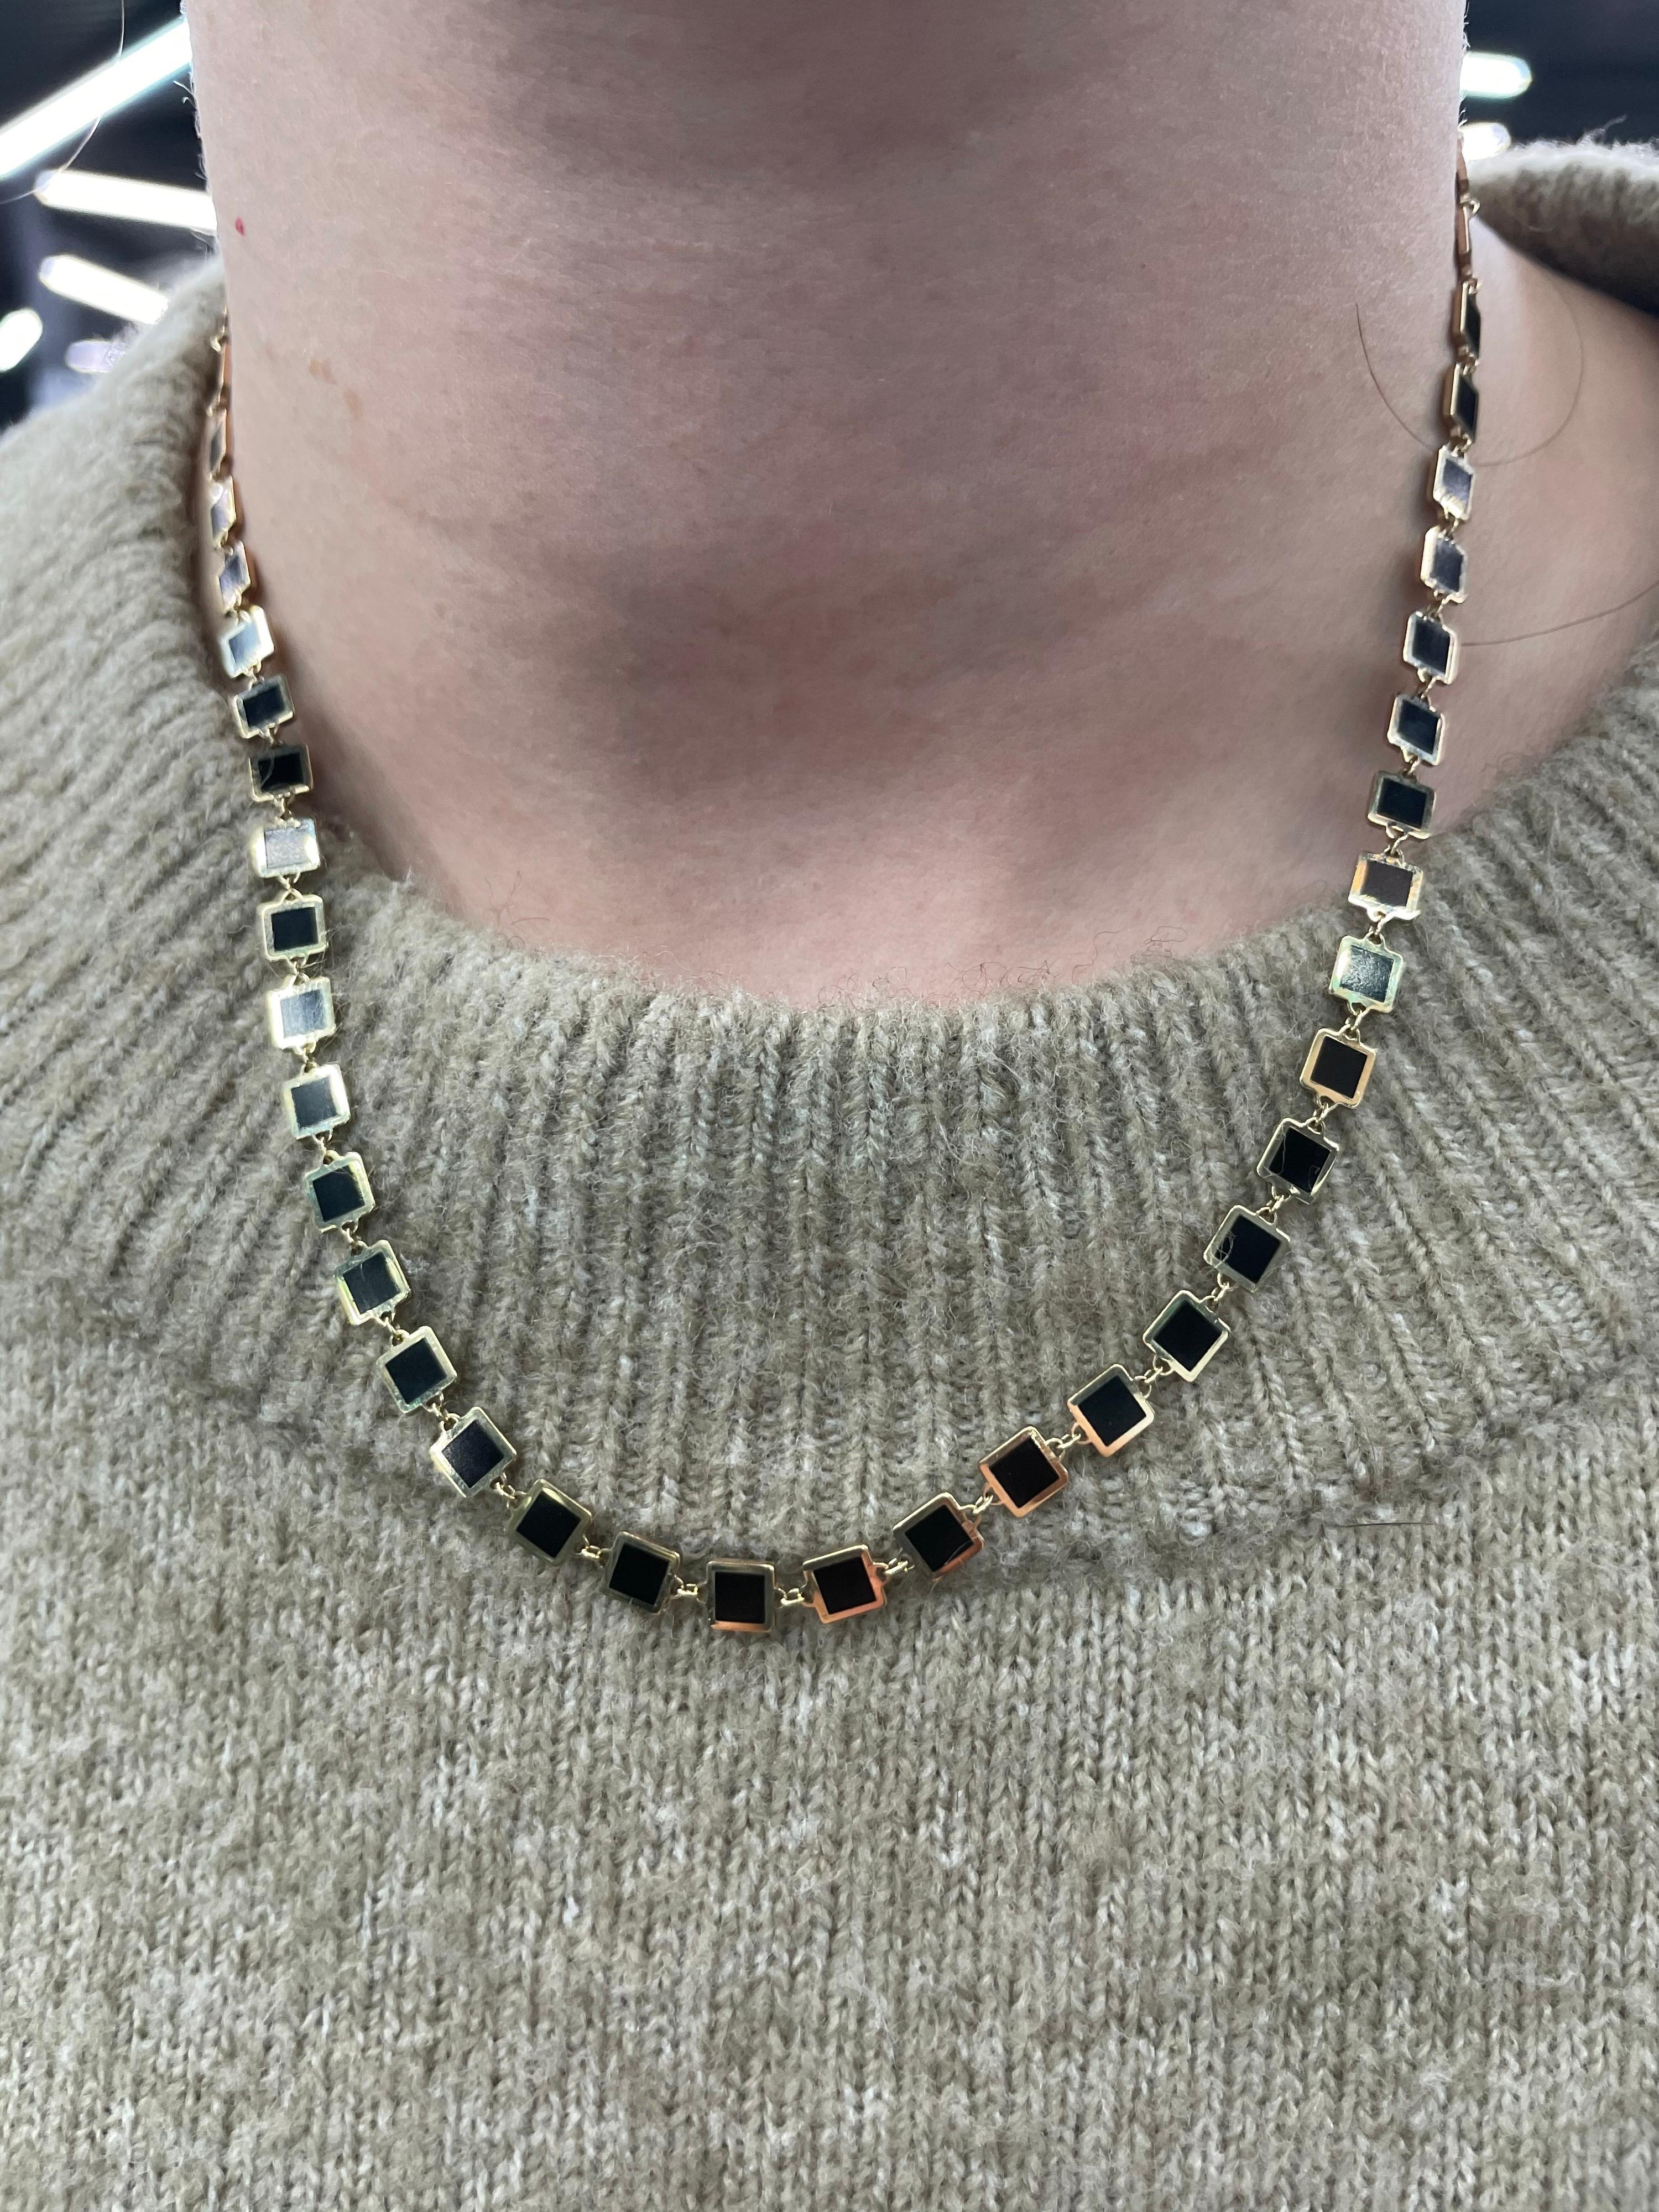 Italian 14k yellow gold necklace featuring onyx and gold trim squares. Super trendy and great for layering!
Adjustable to make as a lariat and hang a charm on. 
Available in different colors and styles.
Email to inquire. 